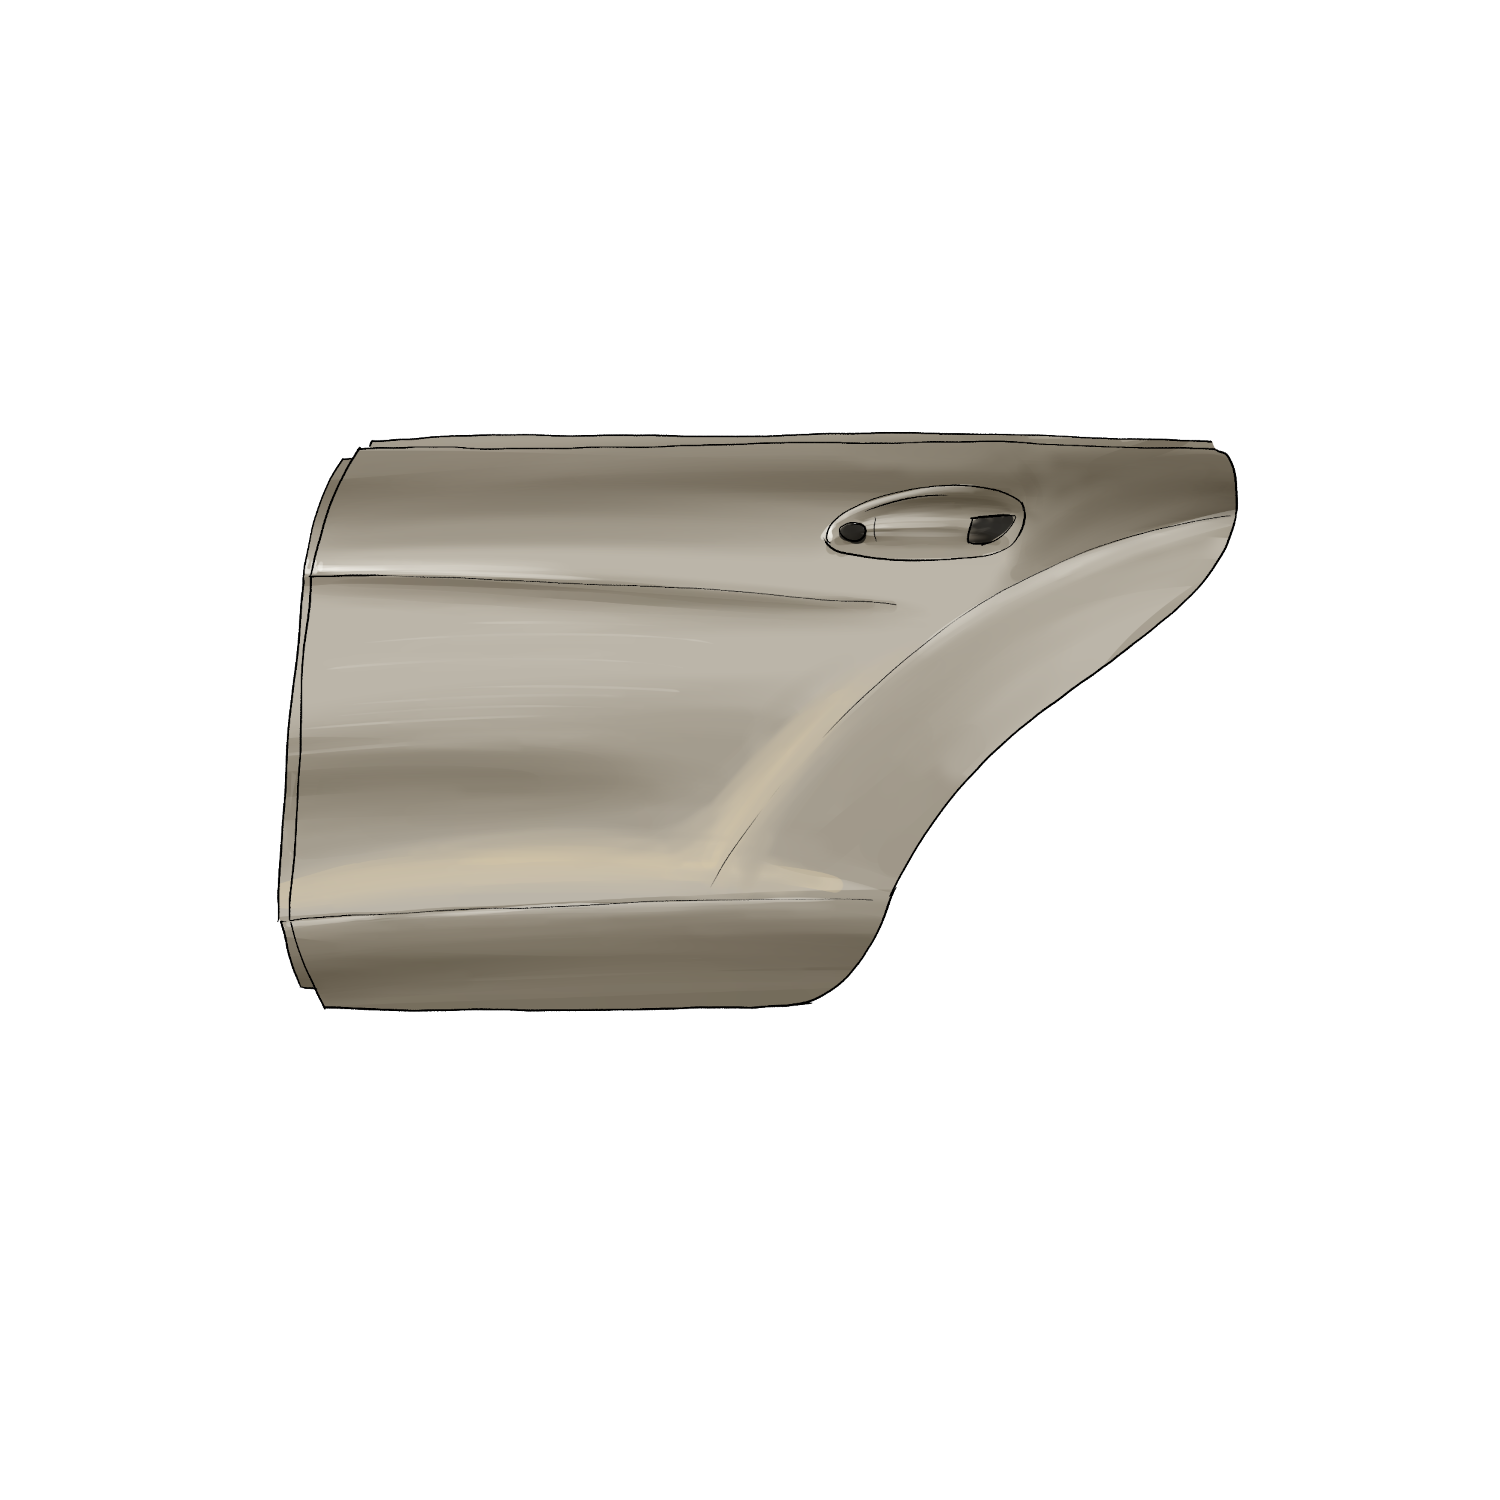  Product image 1 of the product “Door OX5 rear ATH-3 ”